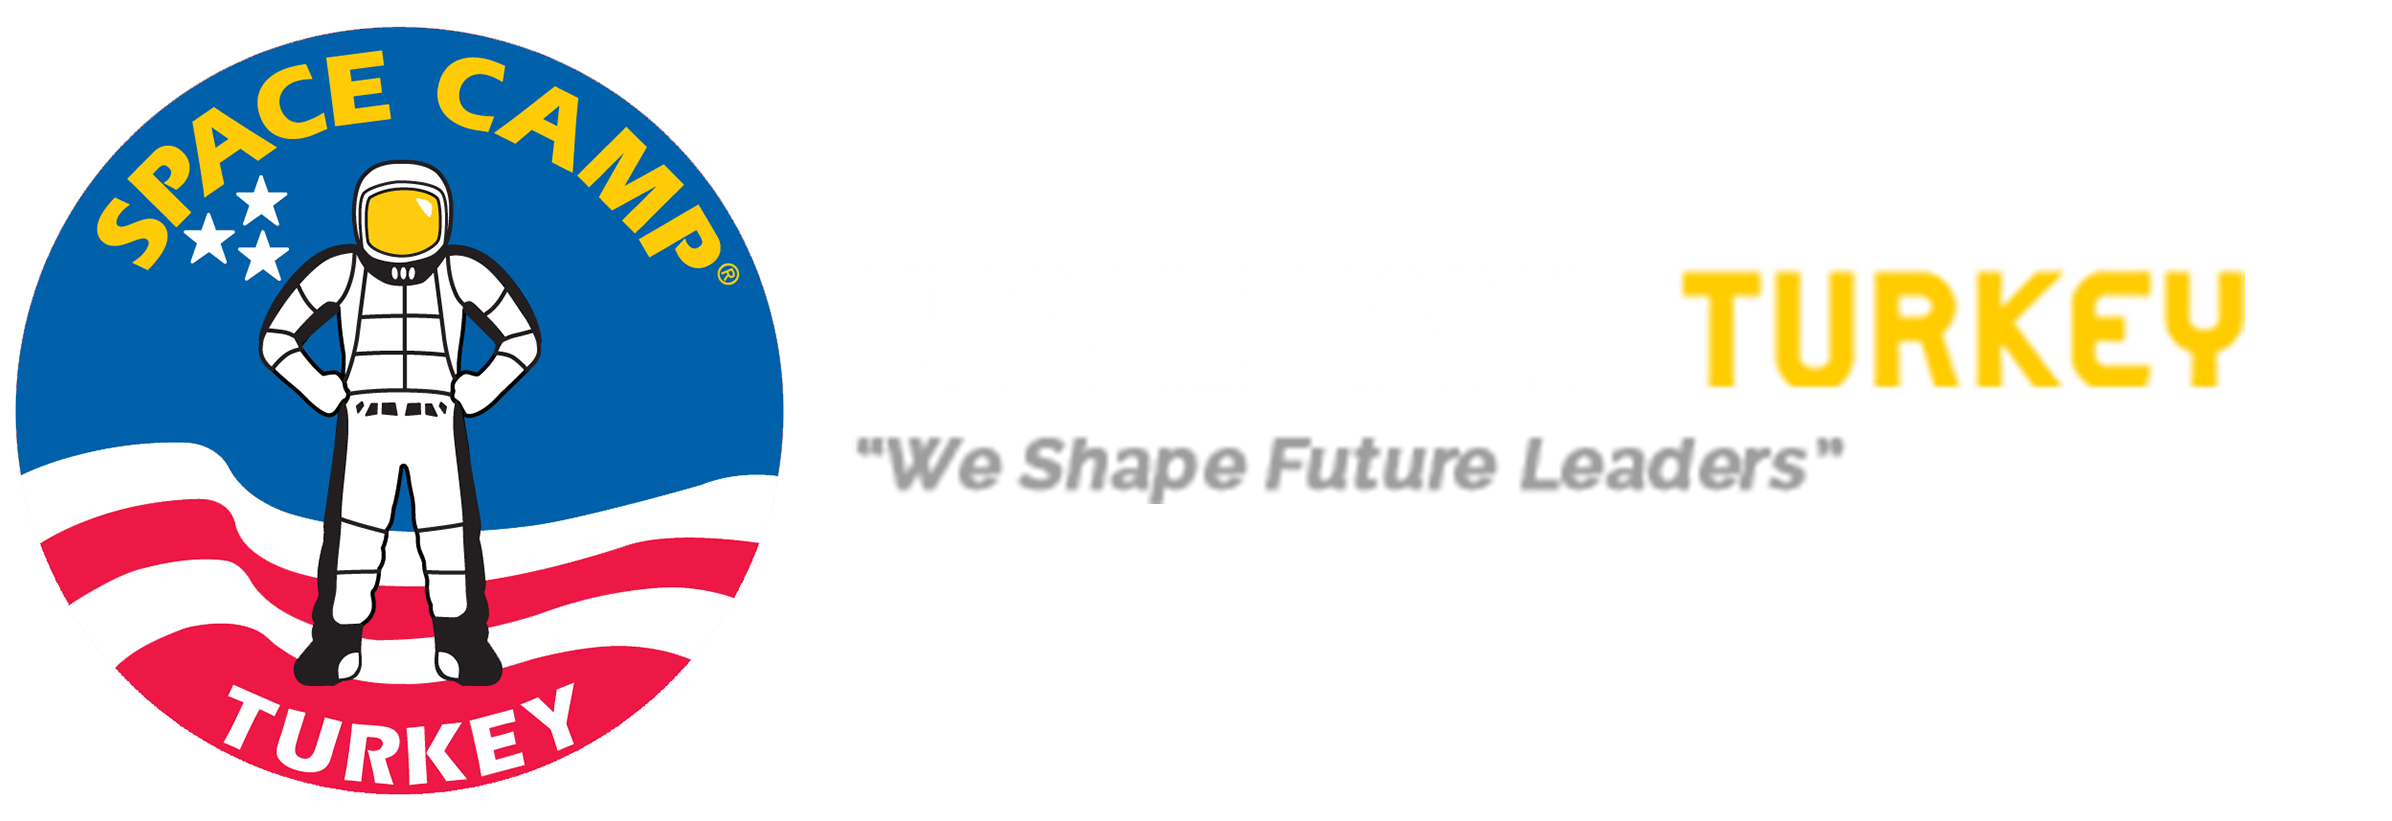 Space Camp Logo - Galactic Summer Camp. Space Camp Turkey